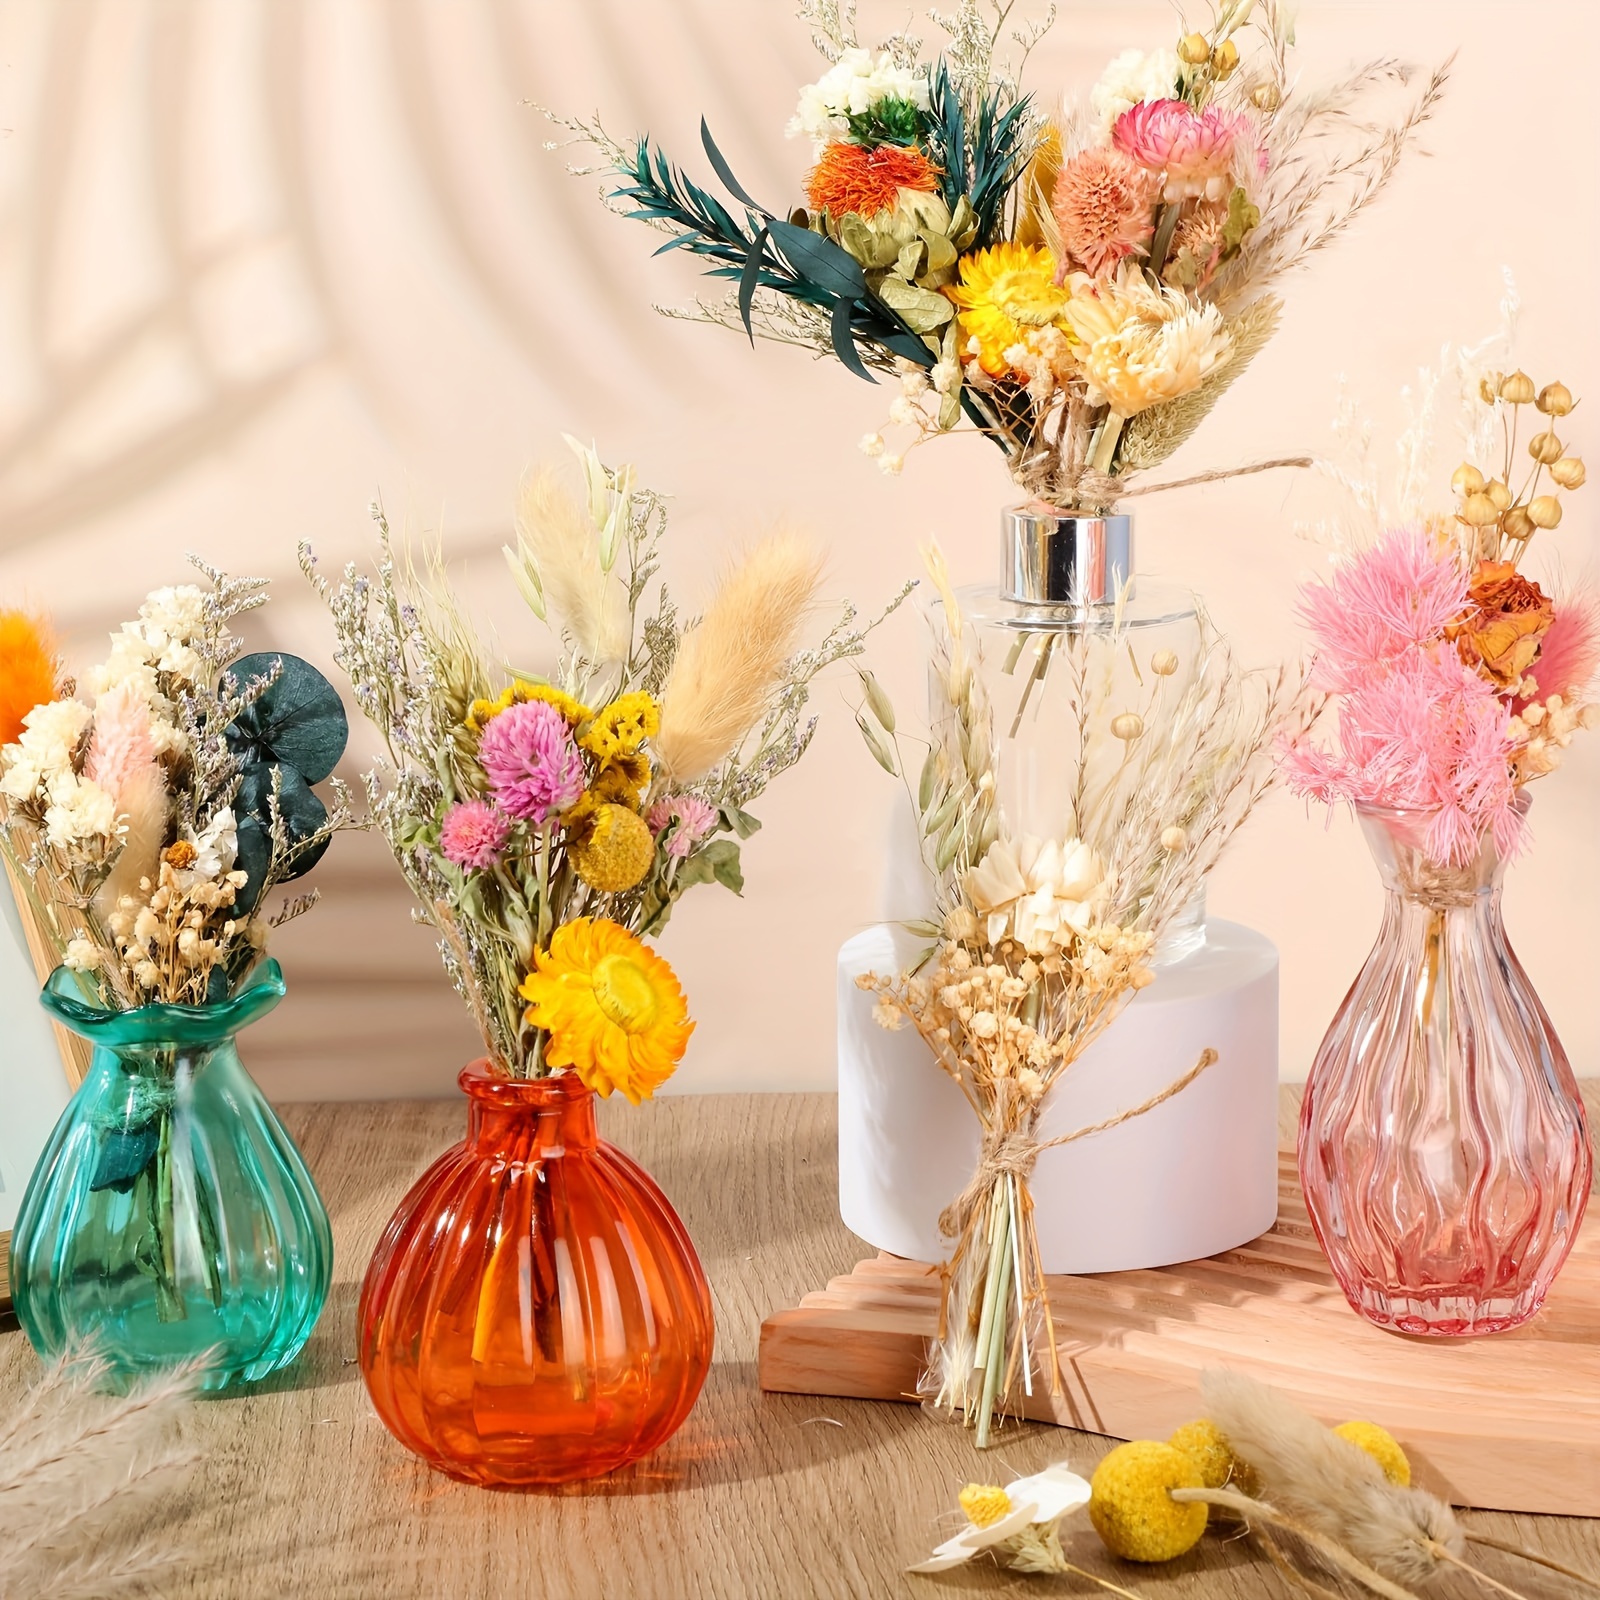 6 Pcs Dried Flowers for Crafts, Mini Dried Flowers with Stems for Crafts  Bulk, Dried Flowers for Vase